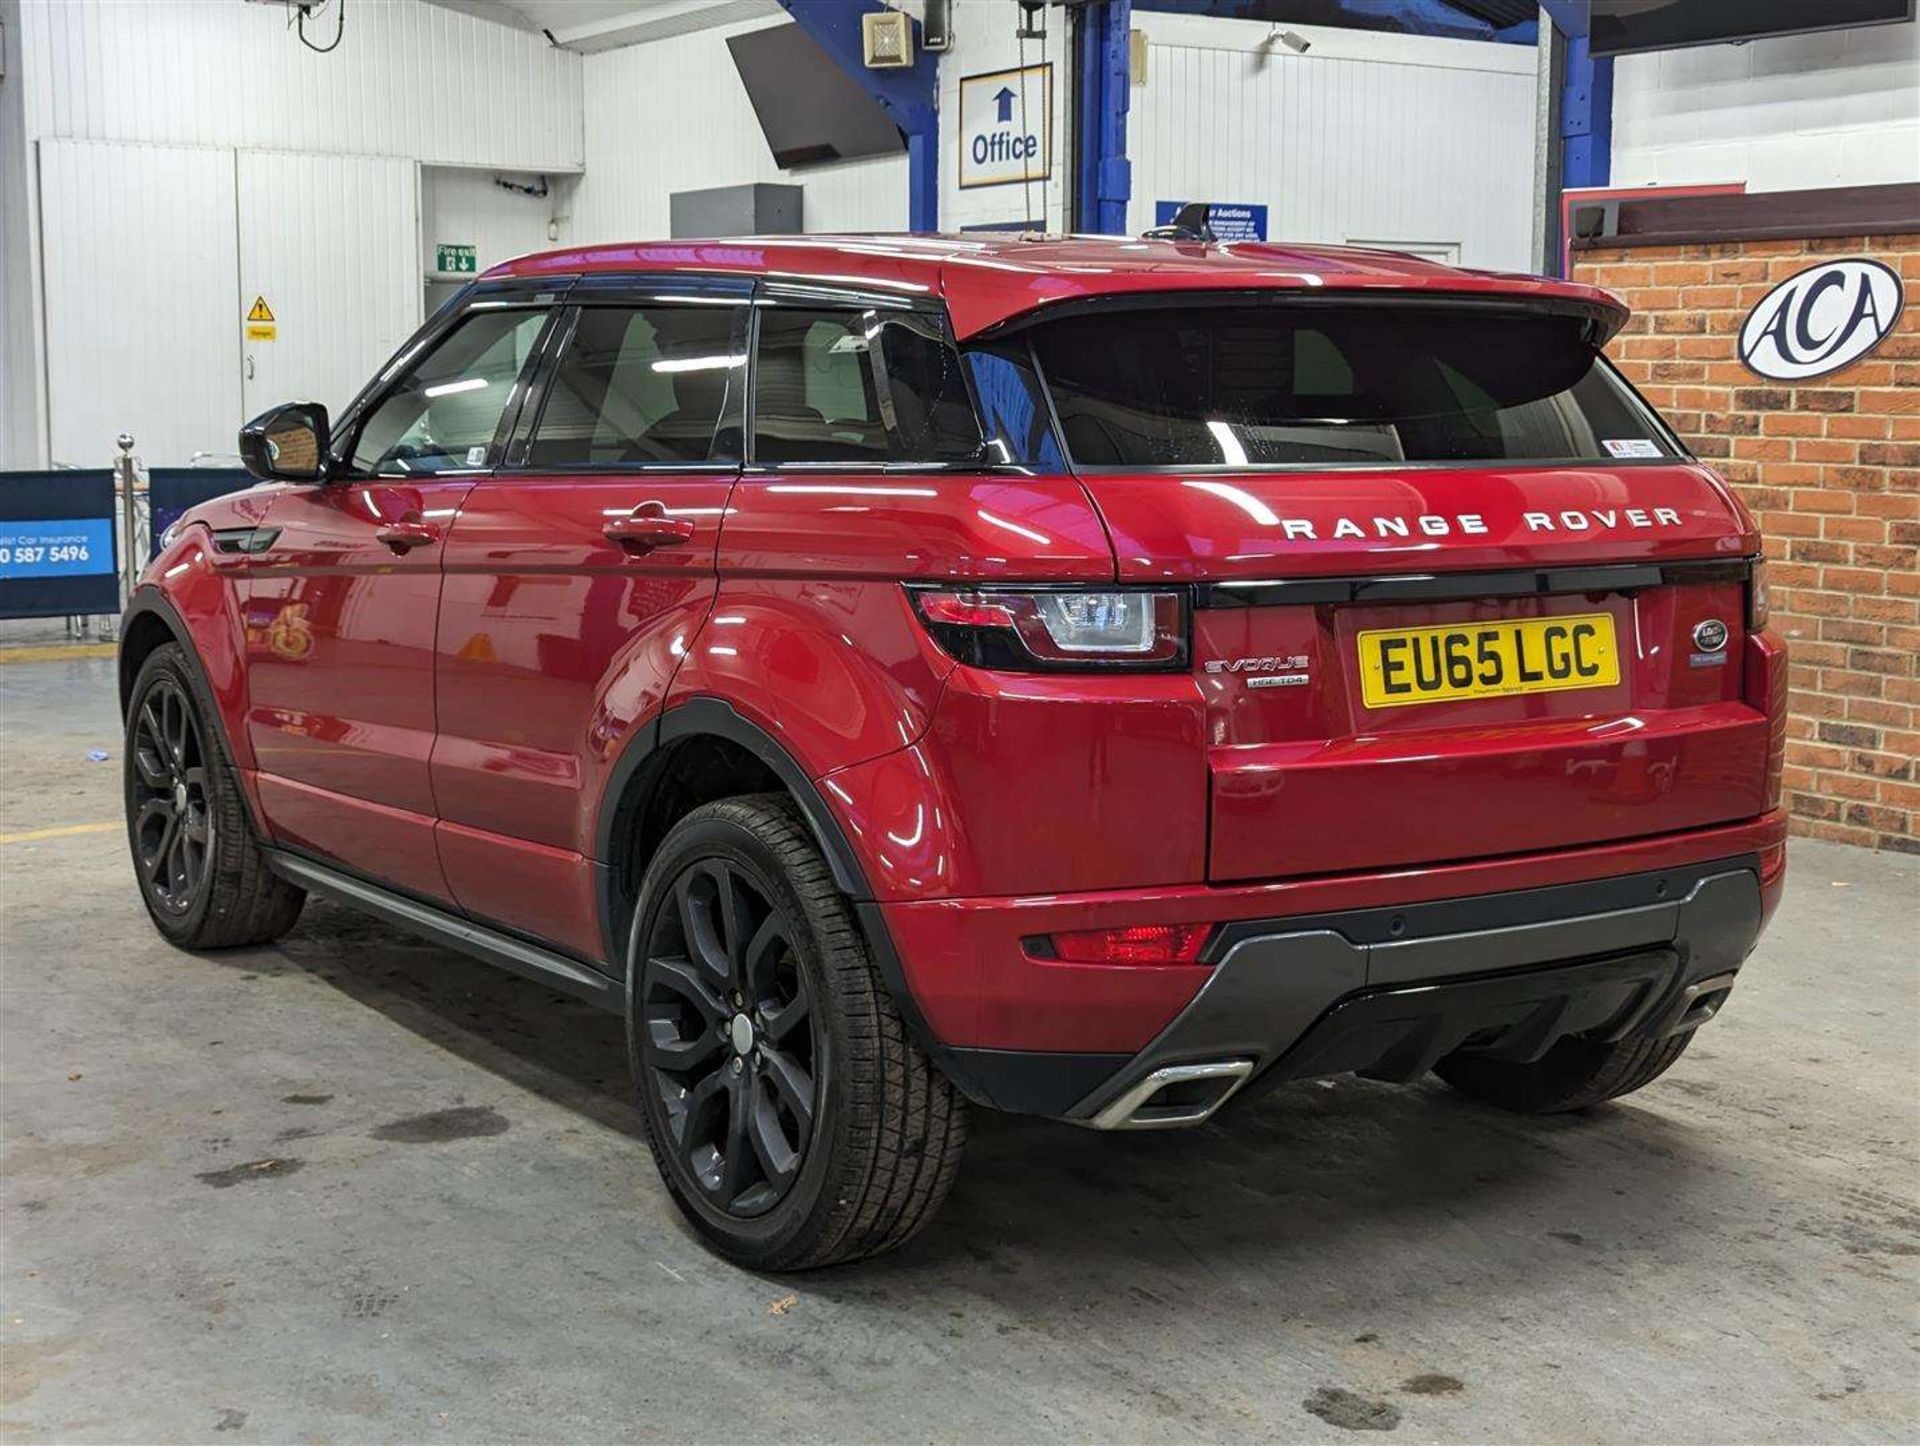 2015 LAND ROVER RANGE ROVER EVOQUE DYNAMIC 5DR AUTO - Image 3 of 26